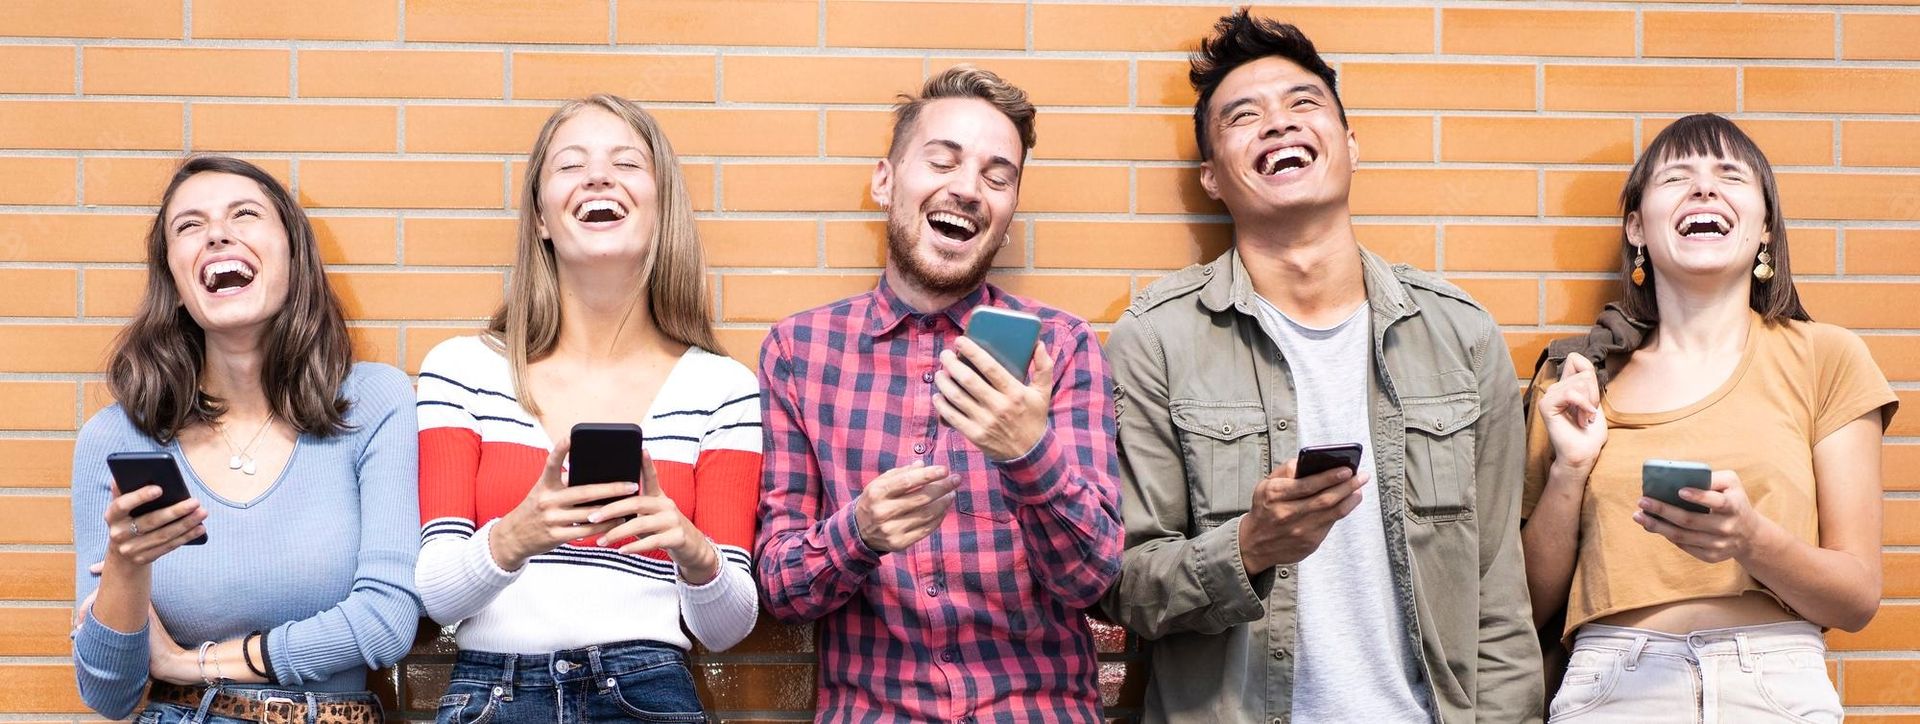 Group of people laughing on their phone